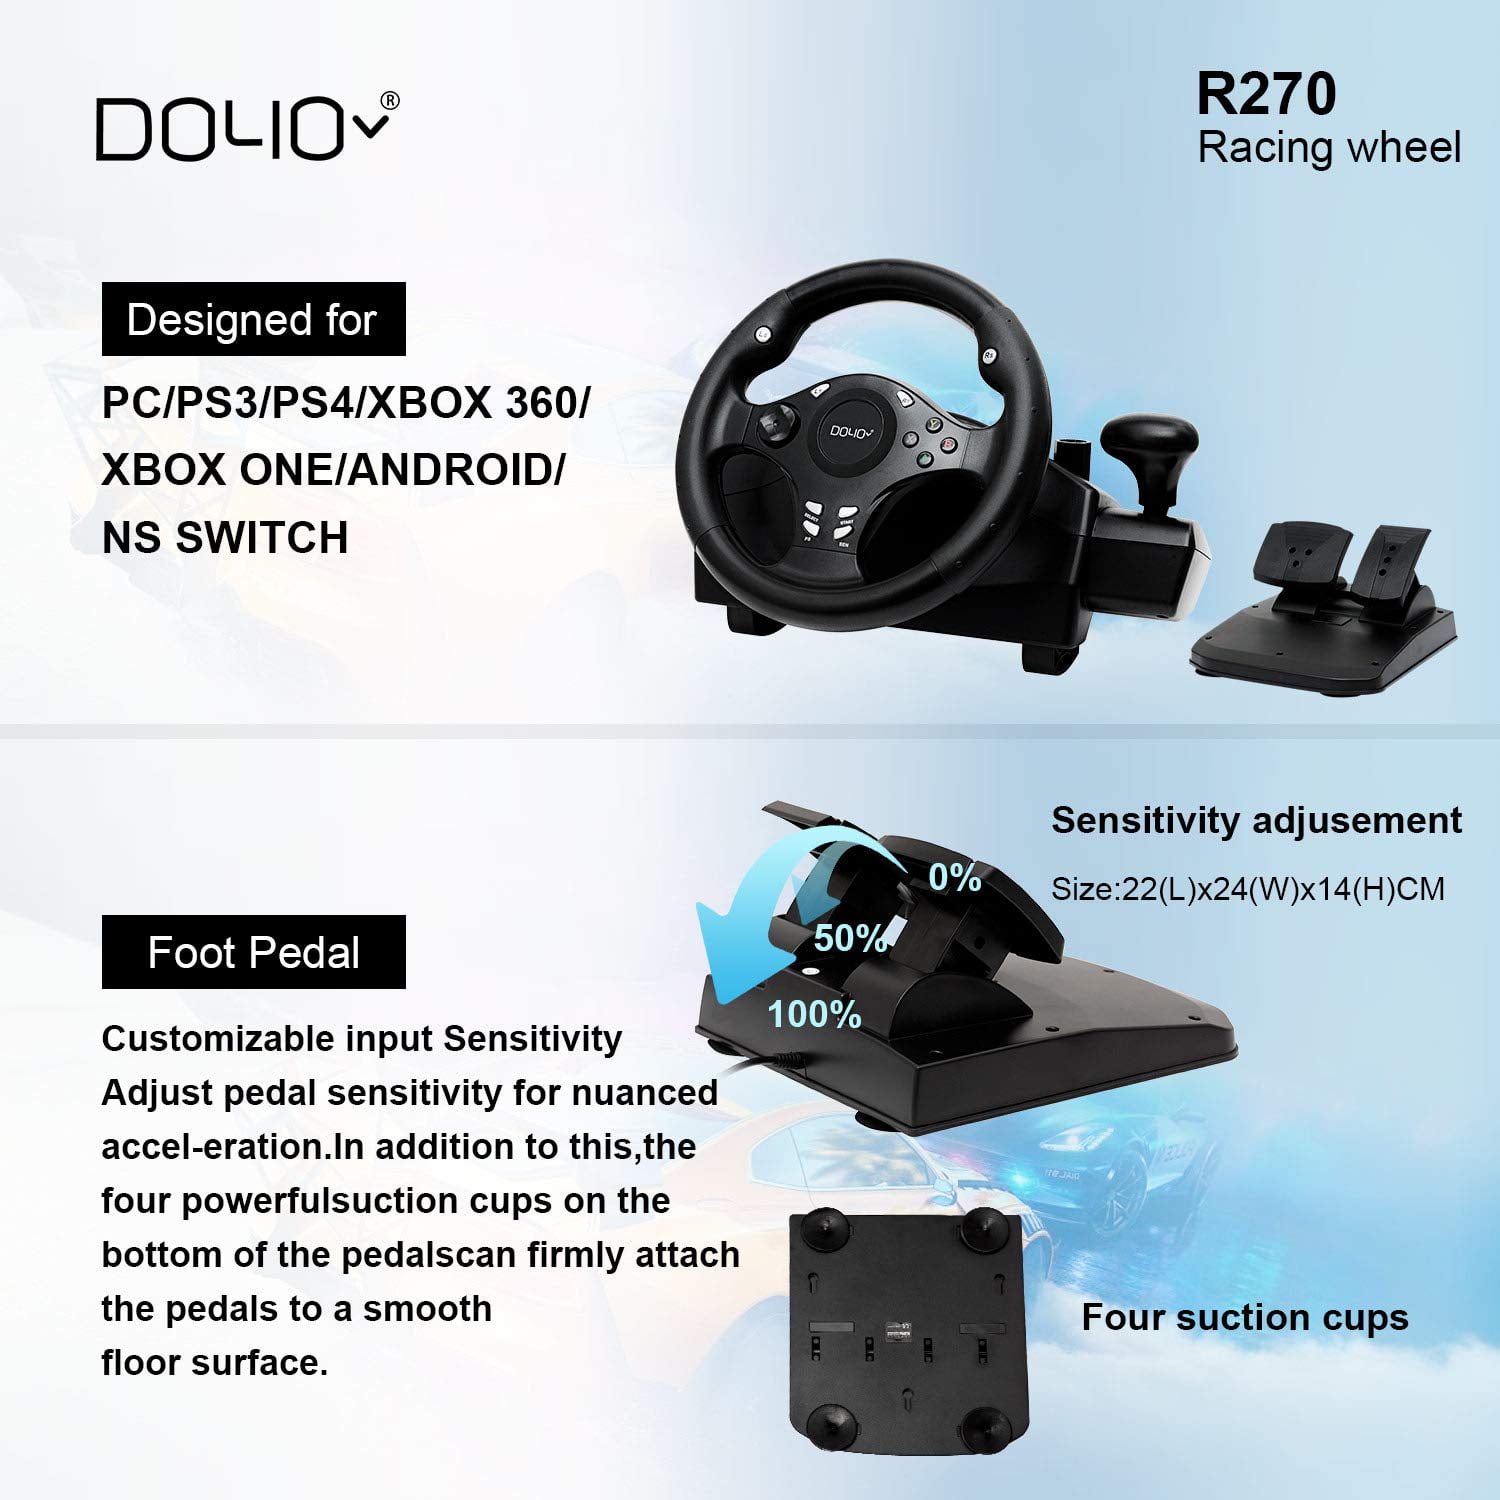 PC Racing Wheel, 270 Degree Gaming Steering Wheel with Responsive Gear and  Pedals for Xbox Series X|S, PC, PS4, Xbox One, Nintendo Switch, Android (Bl 